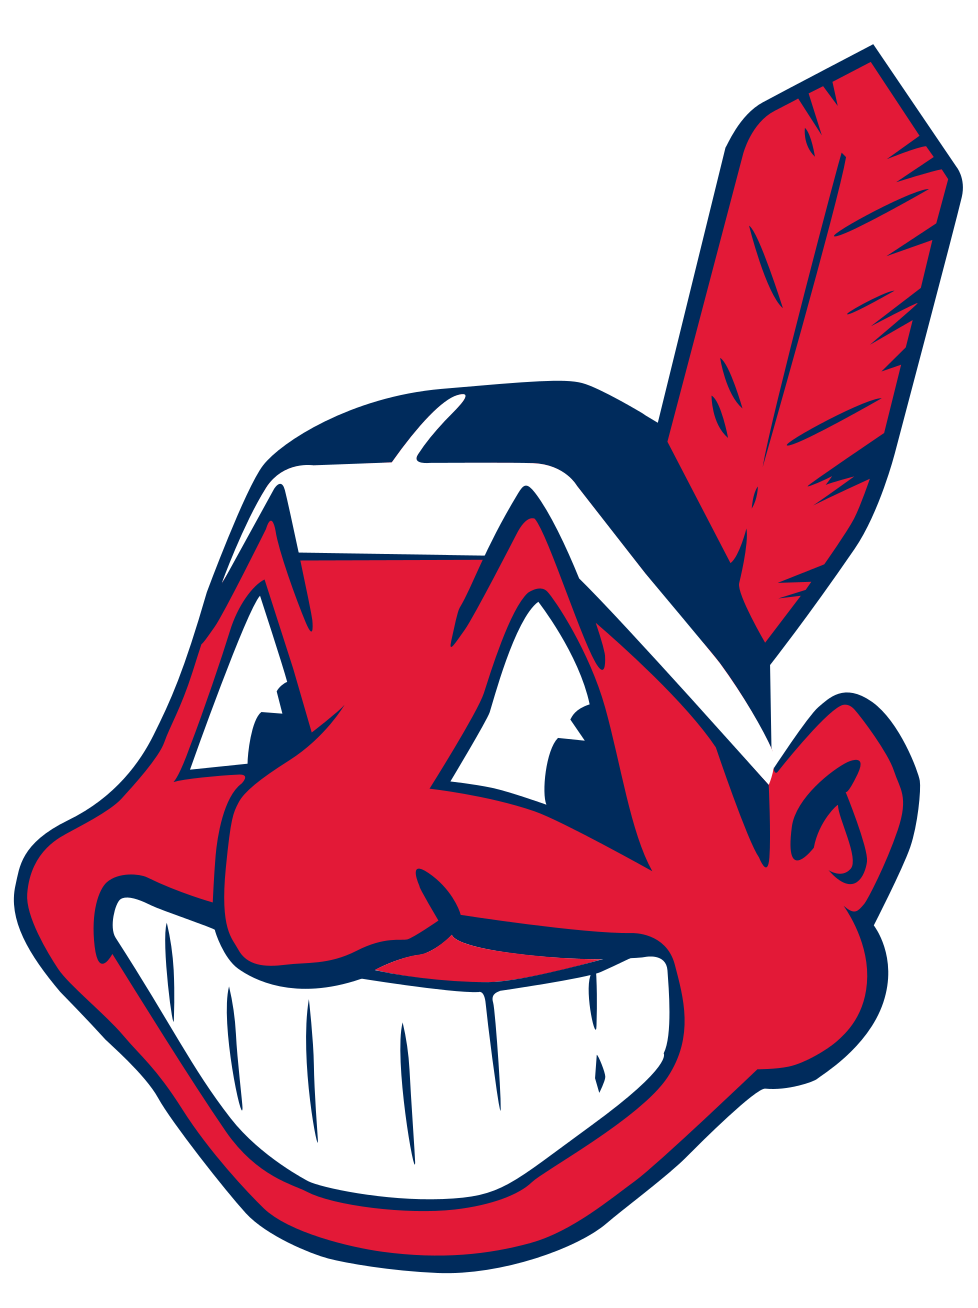 Cleveland Indians Sports Team Logo Designs.ai What Makes a Great Logo